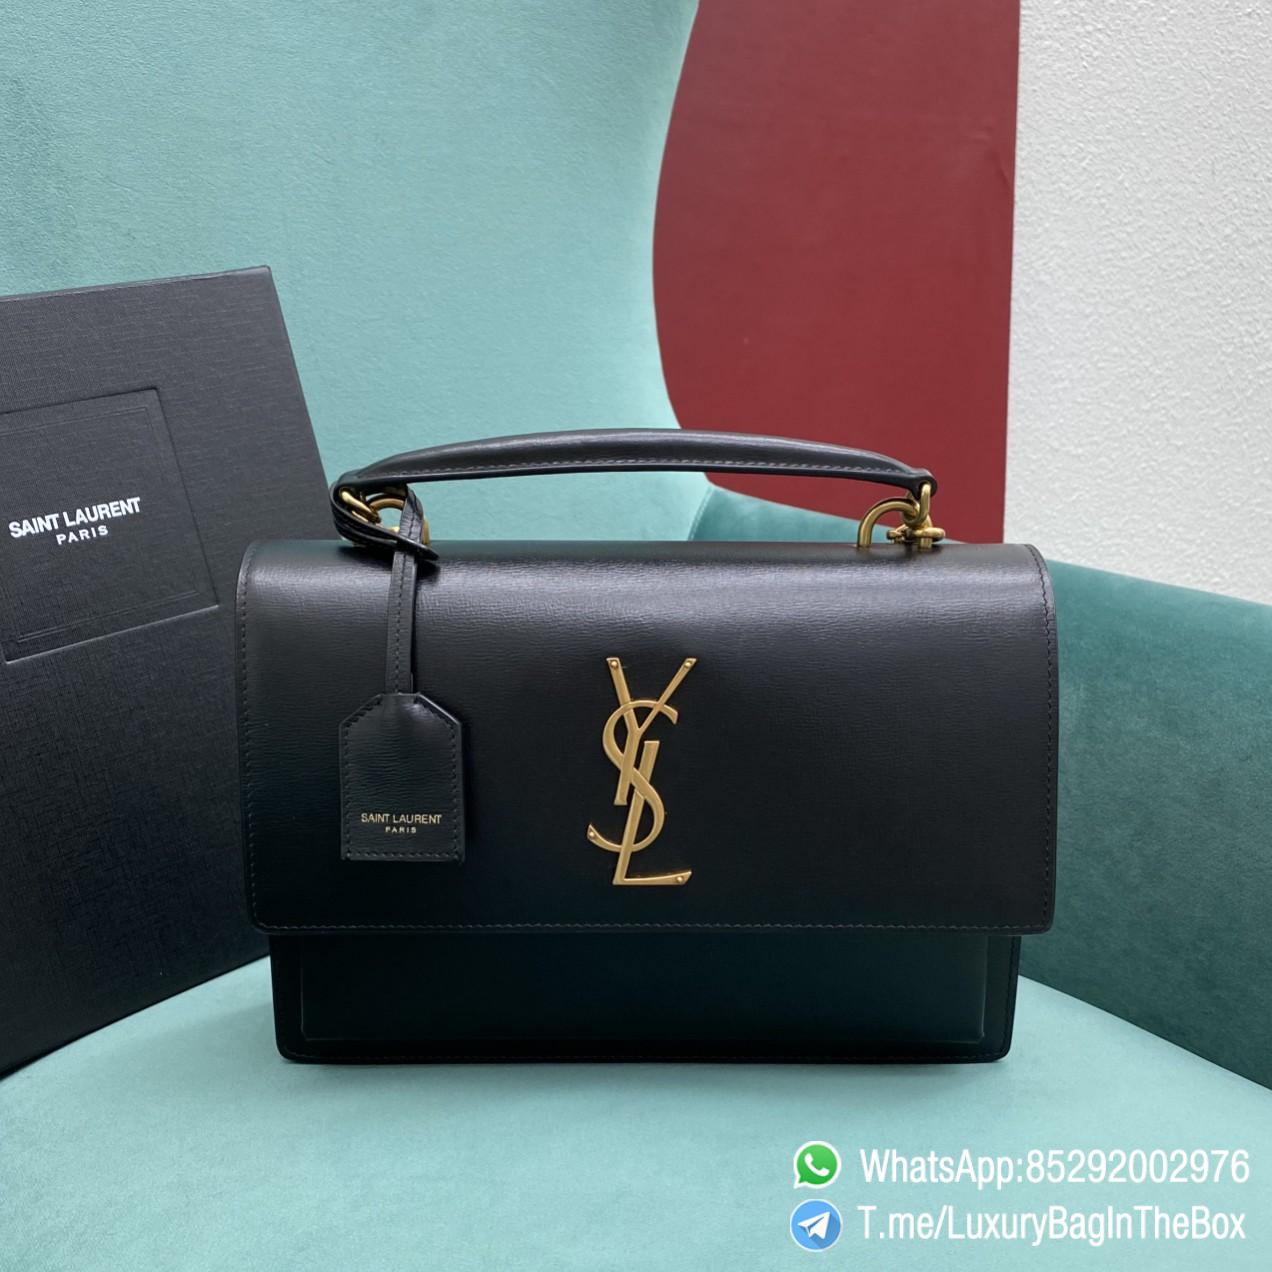 YSL MEDIUM SUNSET SATCHEL IN BLACK SMOOTH LEATHER SATCHEL FRONT FLAP TOP HANDLE ADJUSTABLE AND DETACHABLE LEATHER AND CHAIN STRAP BRONZE METAL YSL INITIALS SKU 634723D420W1000 01